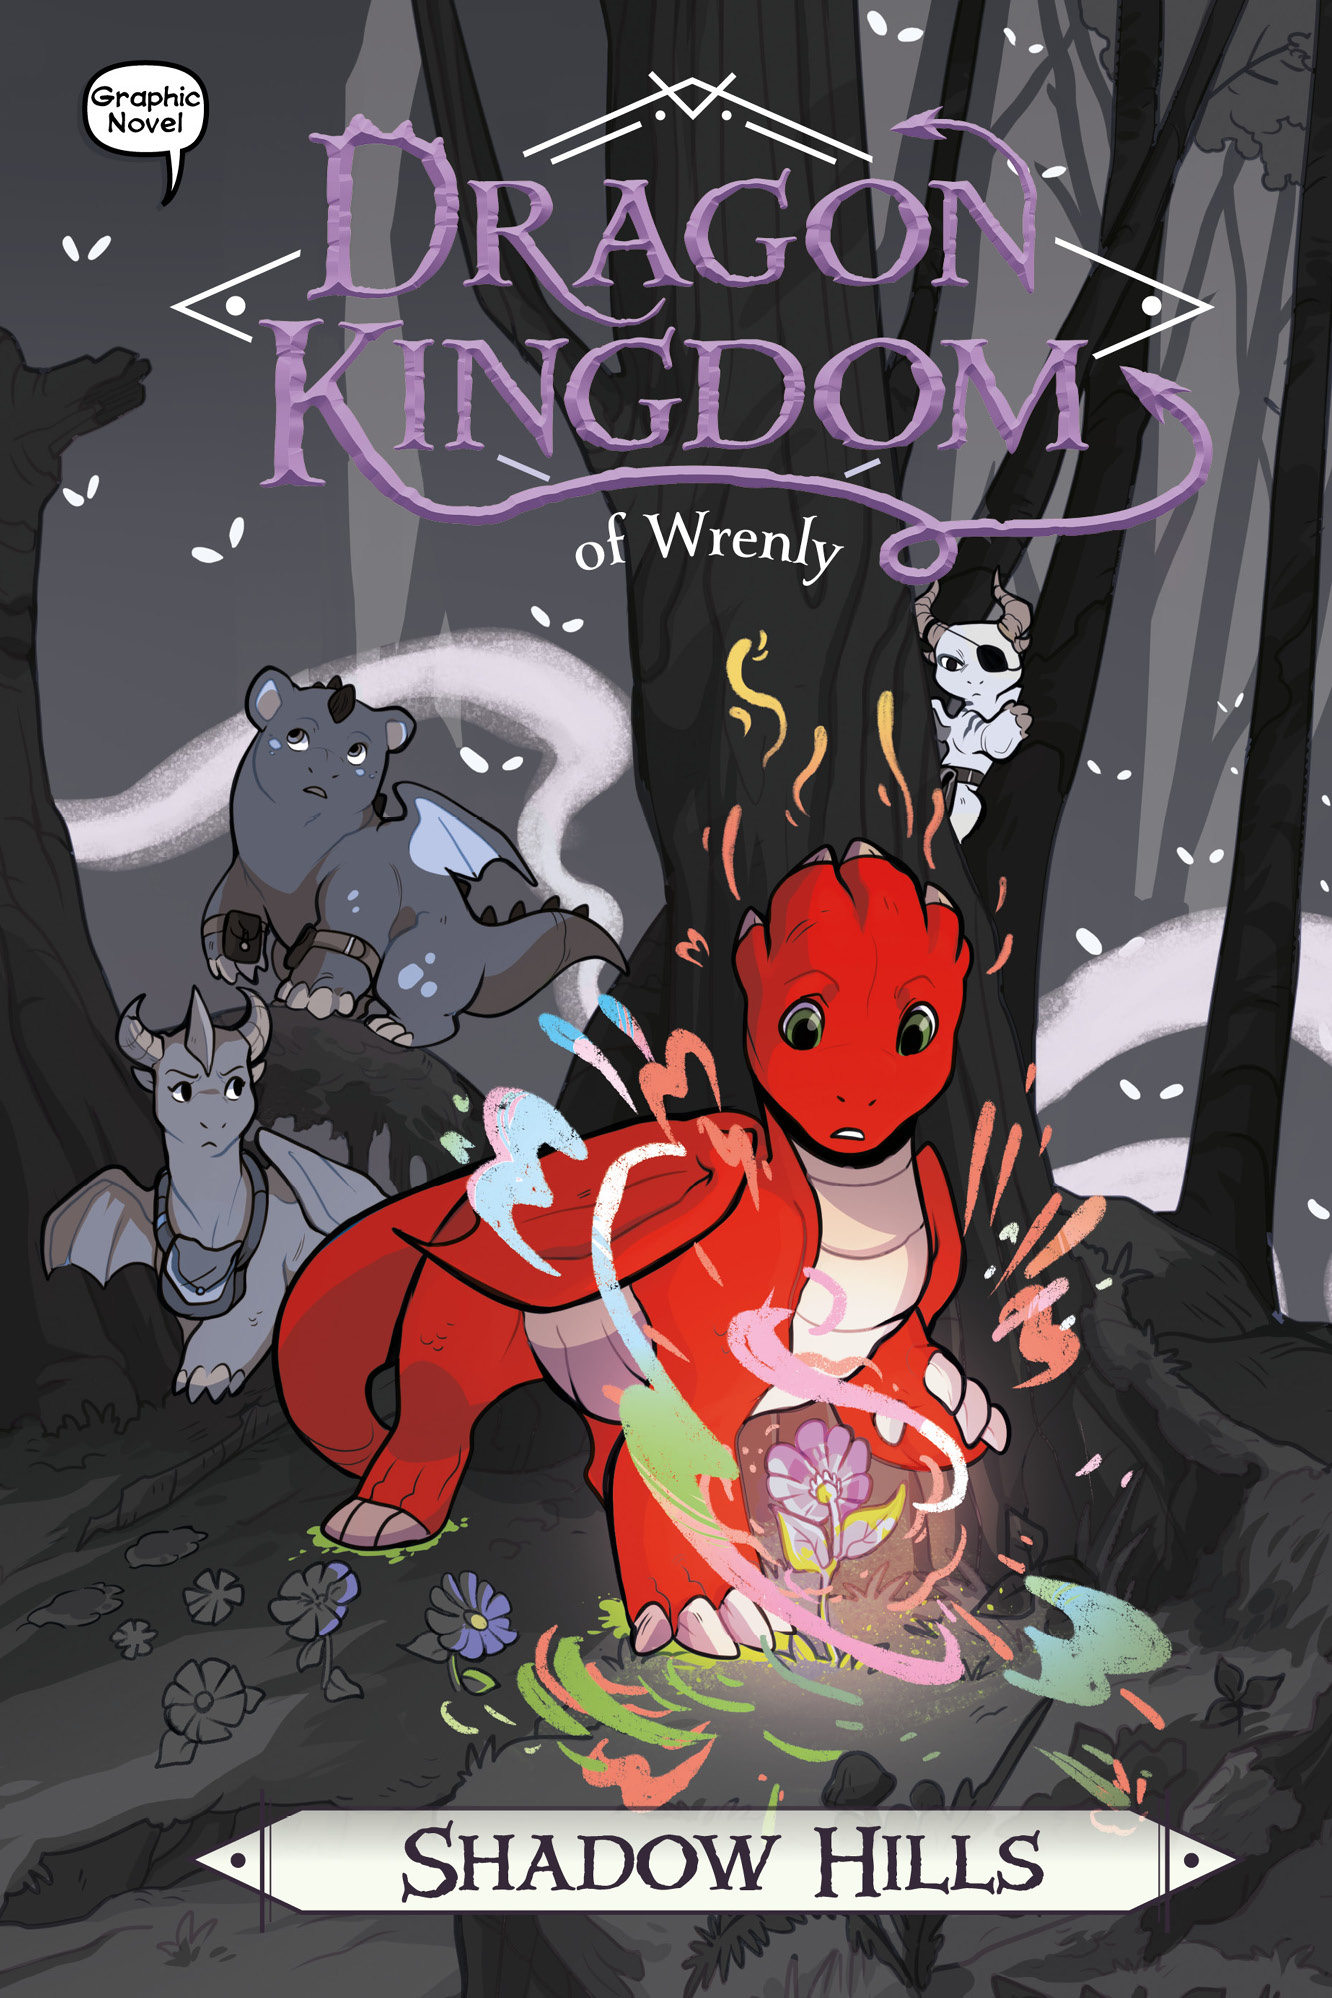 Read online Dragon Kingdom of Wrenly comic -  Issue # TPB 2 - 1